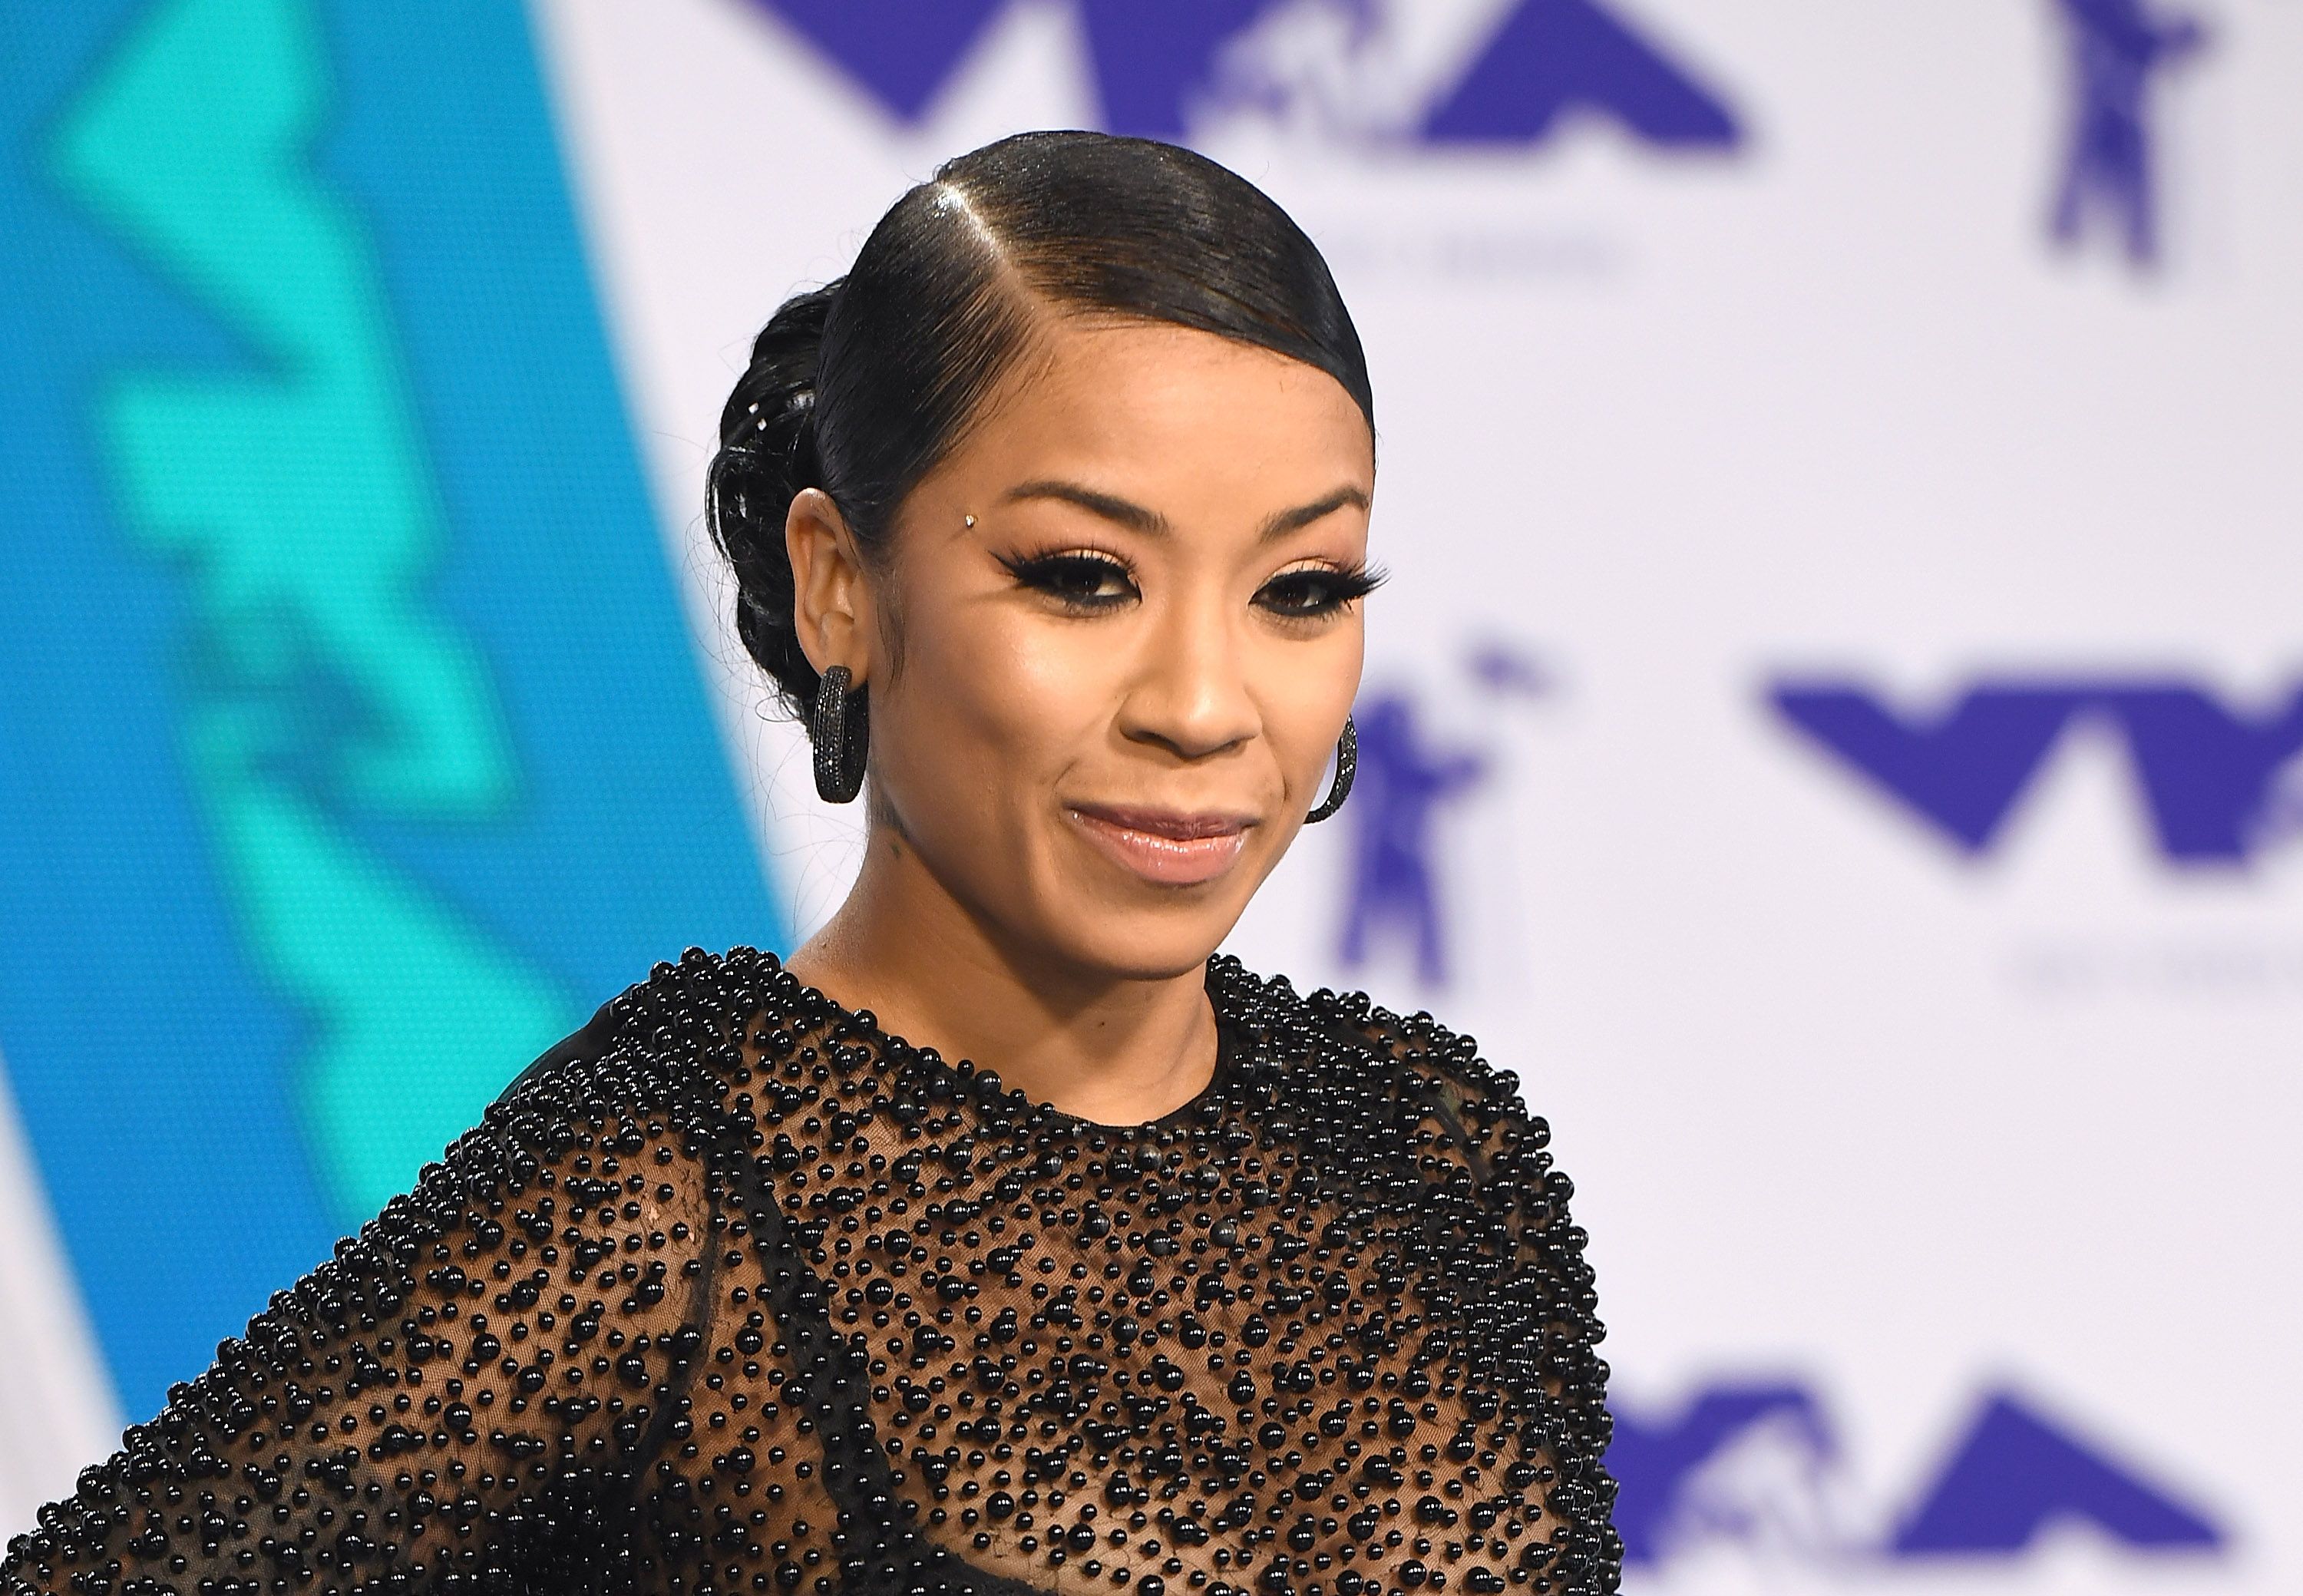 Keyshia Cole at the 2017 MTV Video Music Awards at The Forum on August 27, 2017. | Source: Getty Images